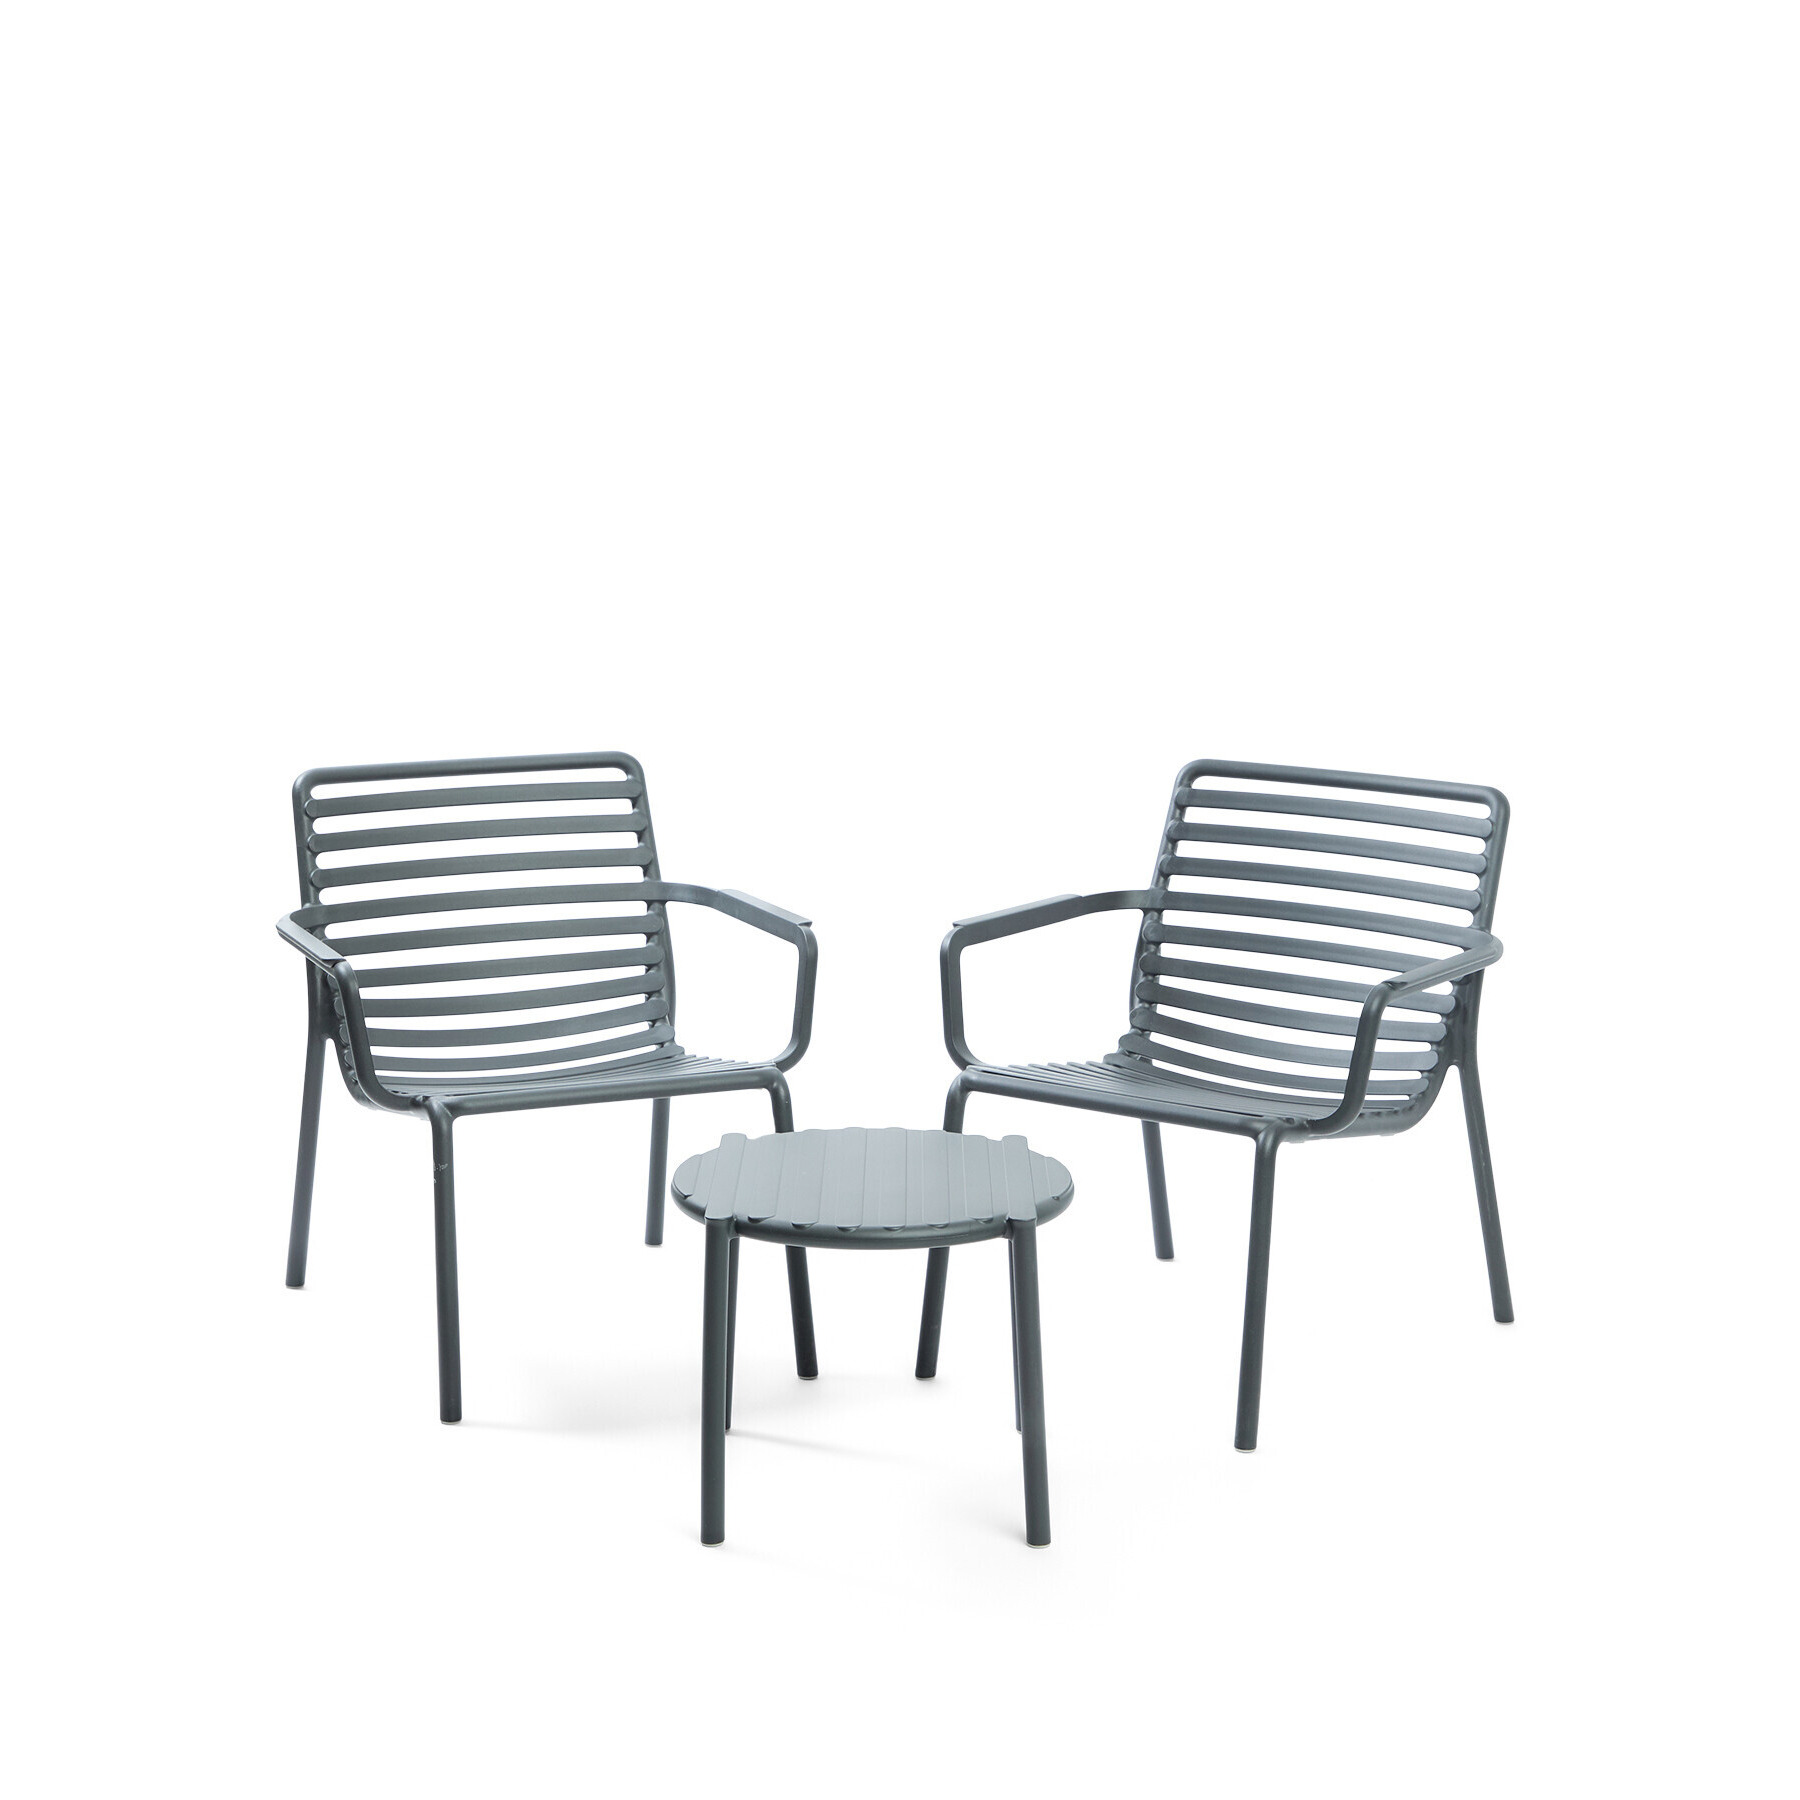 Nardi Doga Bistro Set with Bistro Table and 2 Relax Chairs Grey - image 1